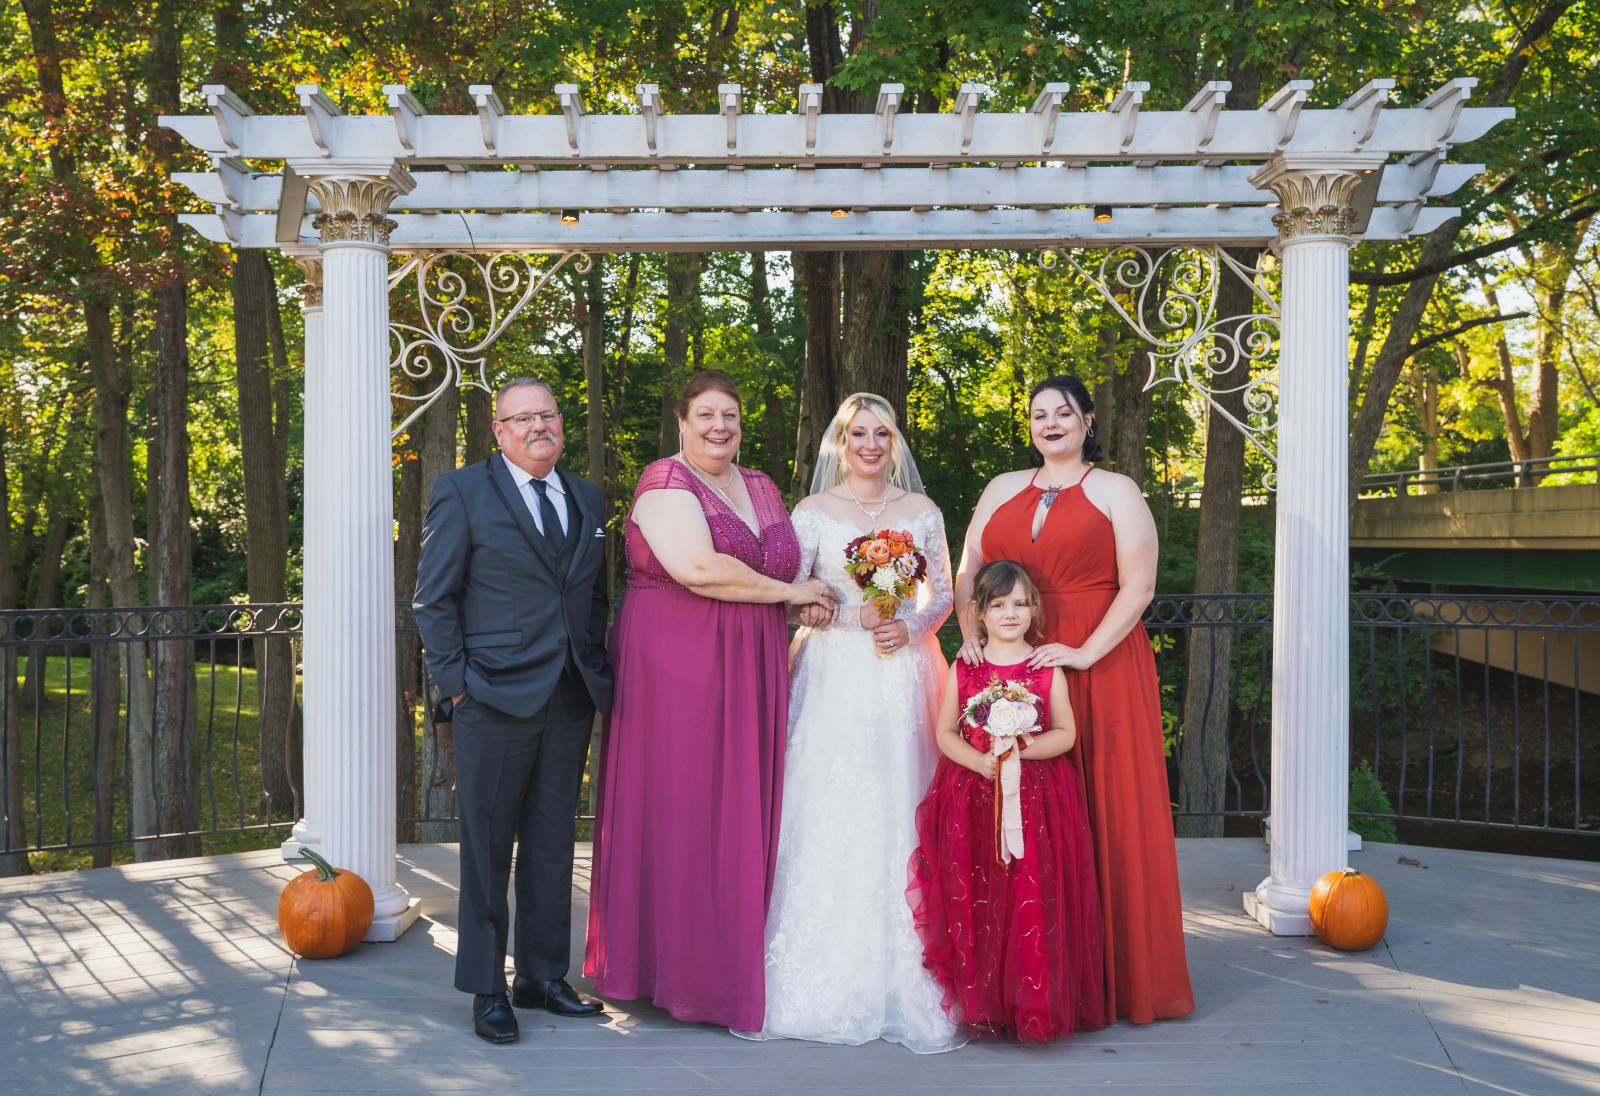 Bride with maid of honor, flower girl, mom and dad, parents of the bride, family portrait, wooden arch with columns, green, nature, trees, fall wedding, cute outdoor wedding ceremony at Grand Pacific Wedding Gardens